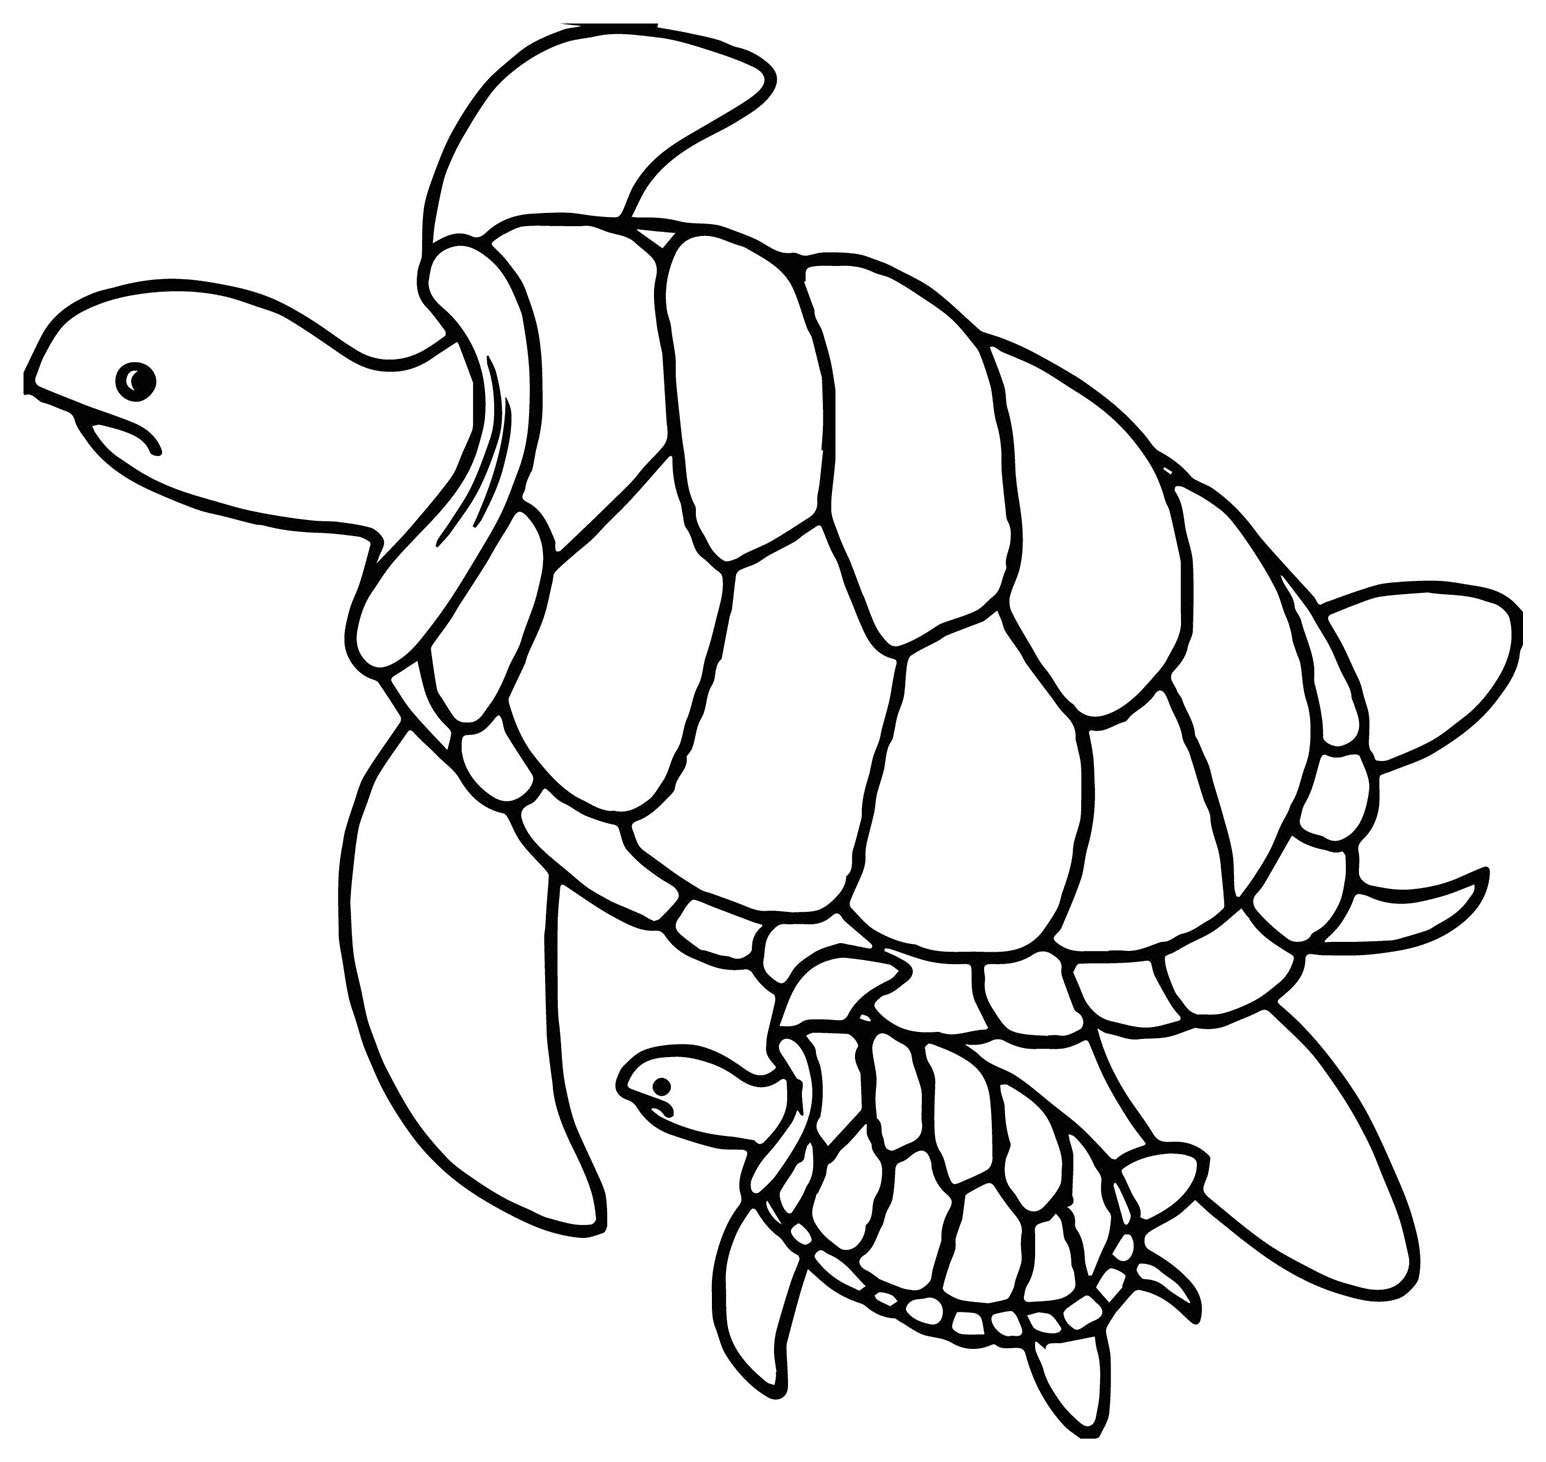 Turtle drawing to print and color